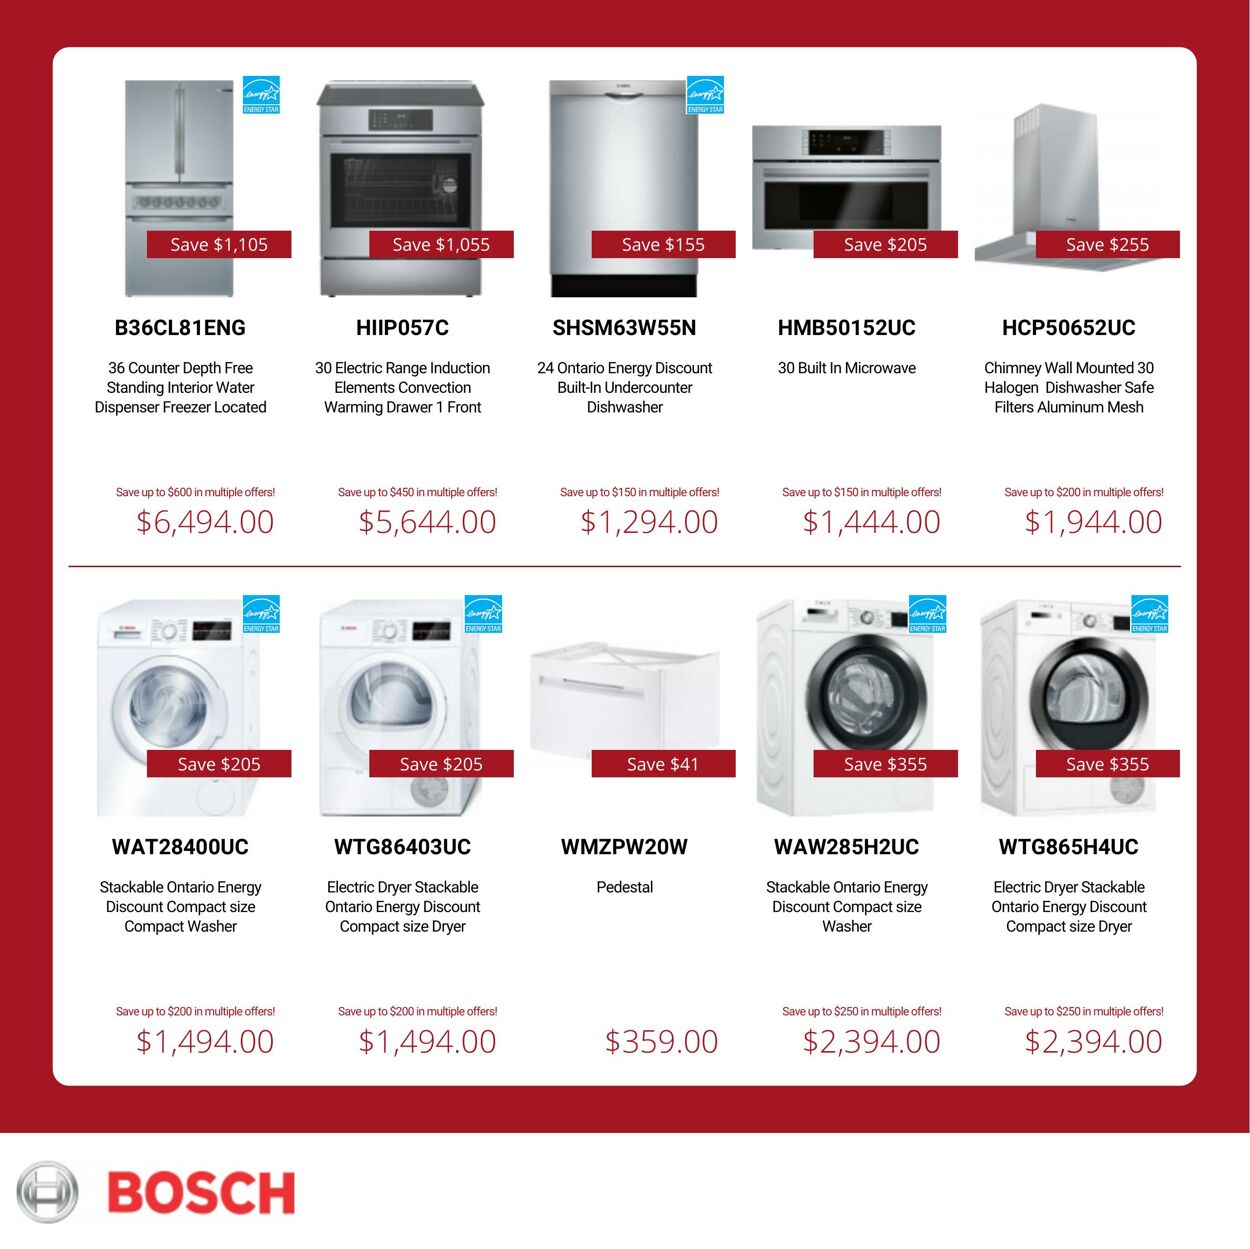 Flyer Canadian Appliance Source 24.11.2022 - 30.11.2022